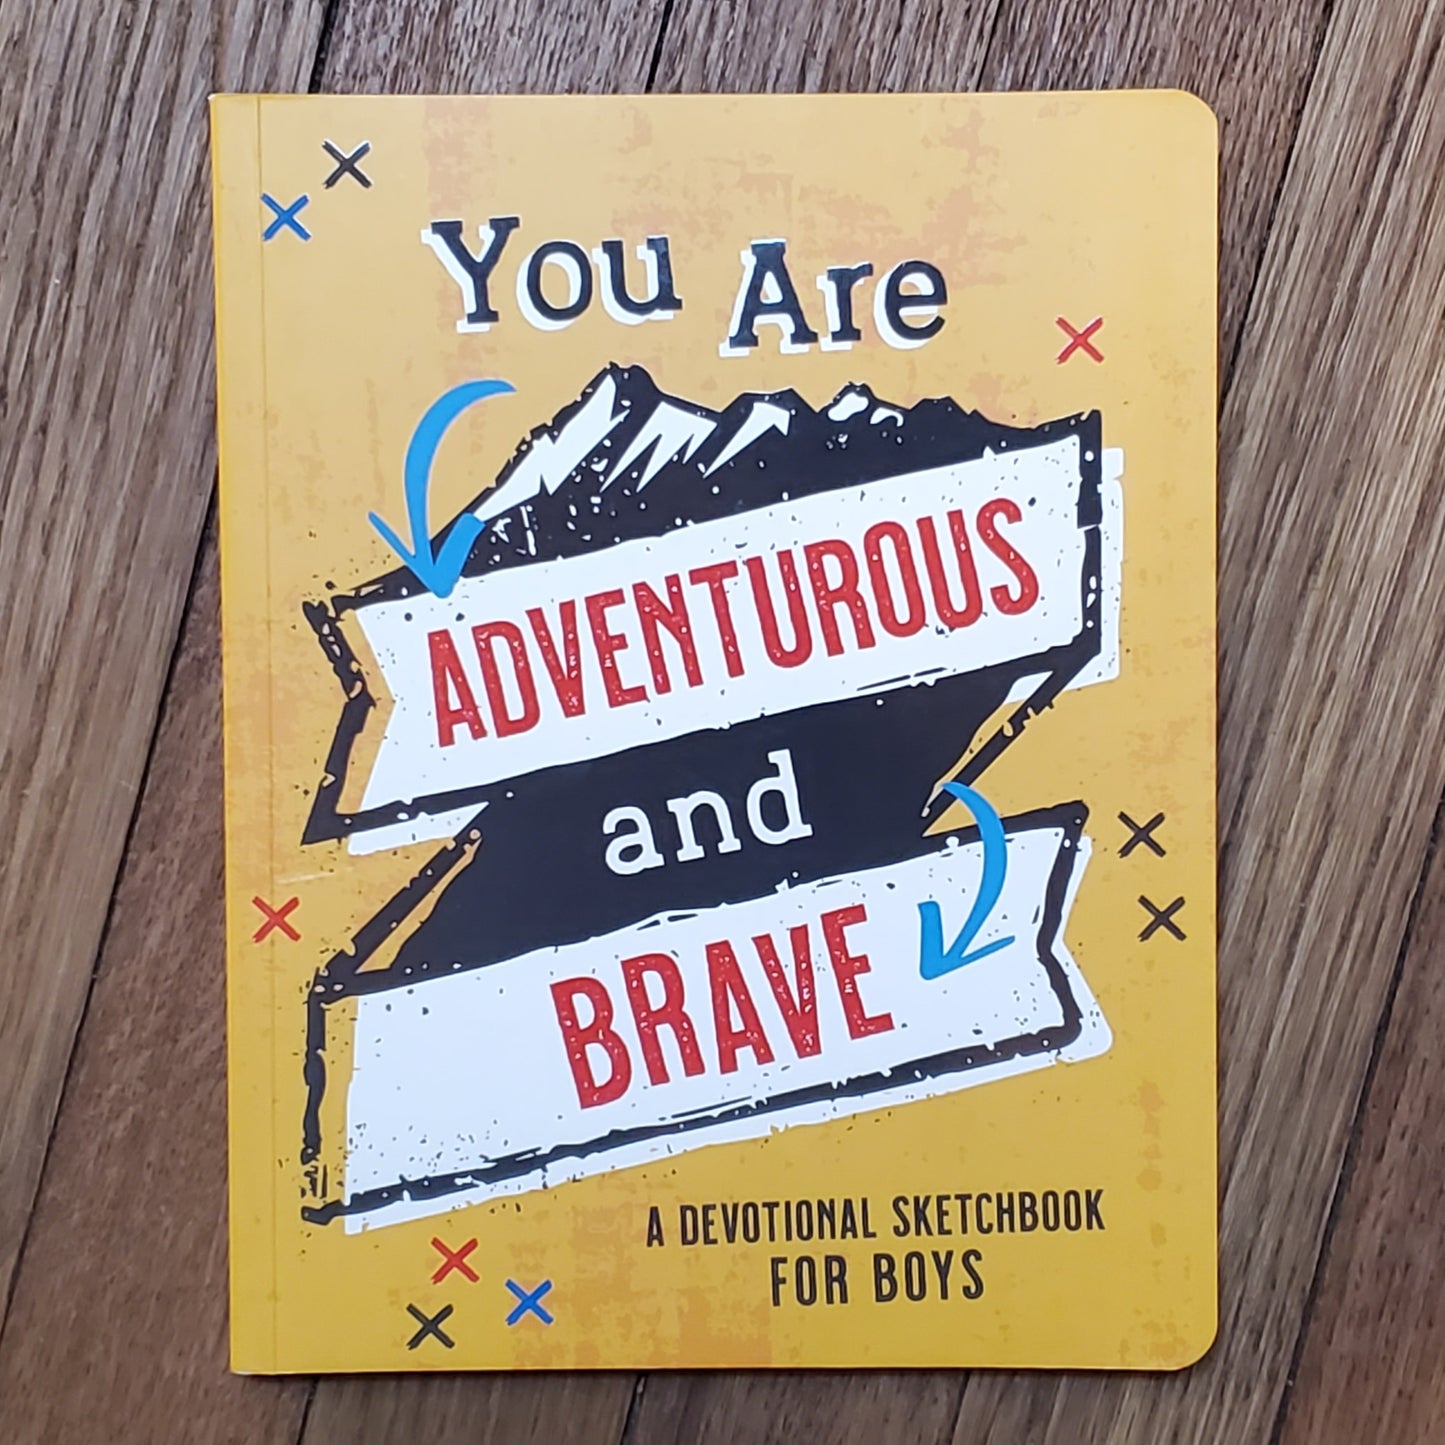 GB You Are Adventurous and Brave: A Devotional Sketchbook for Boys